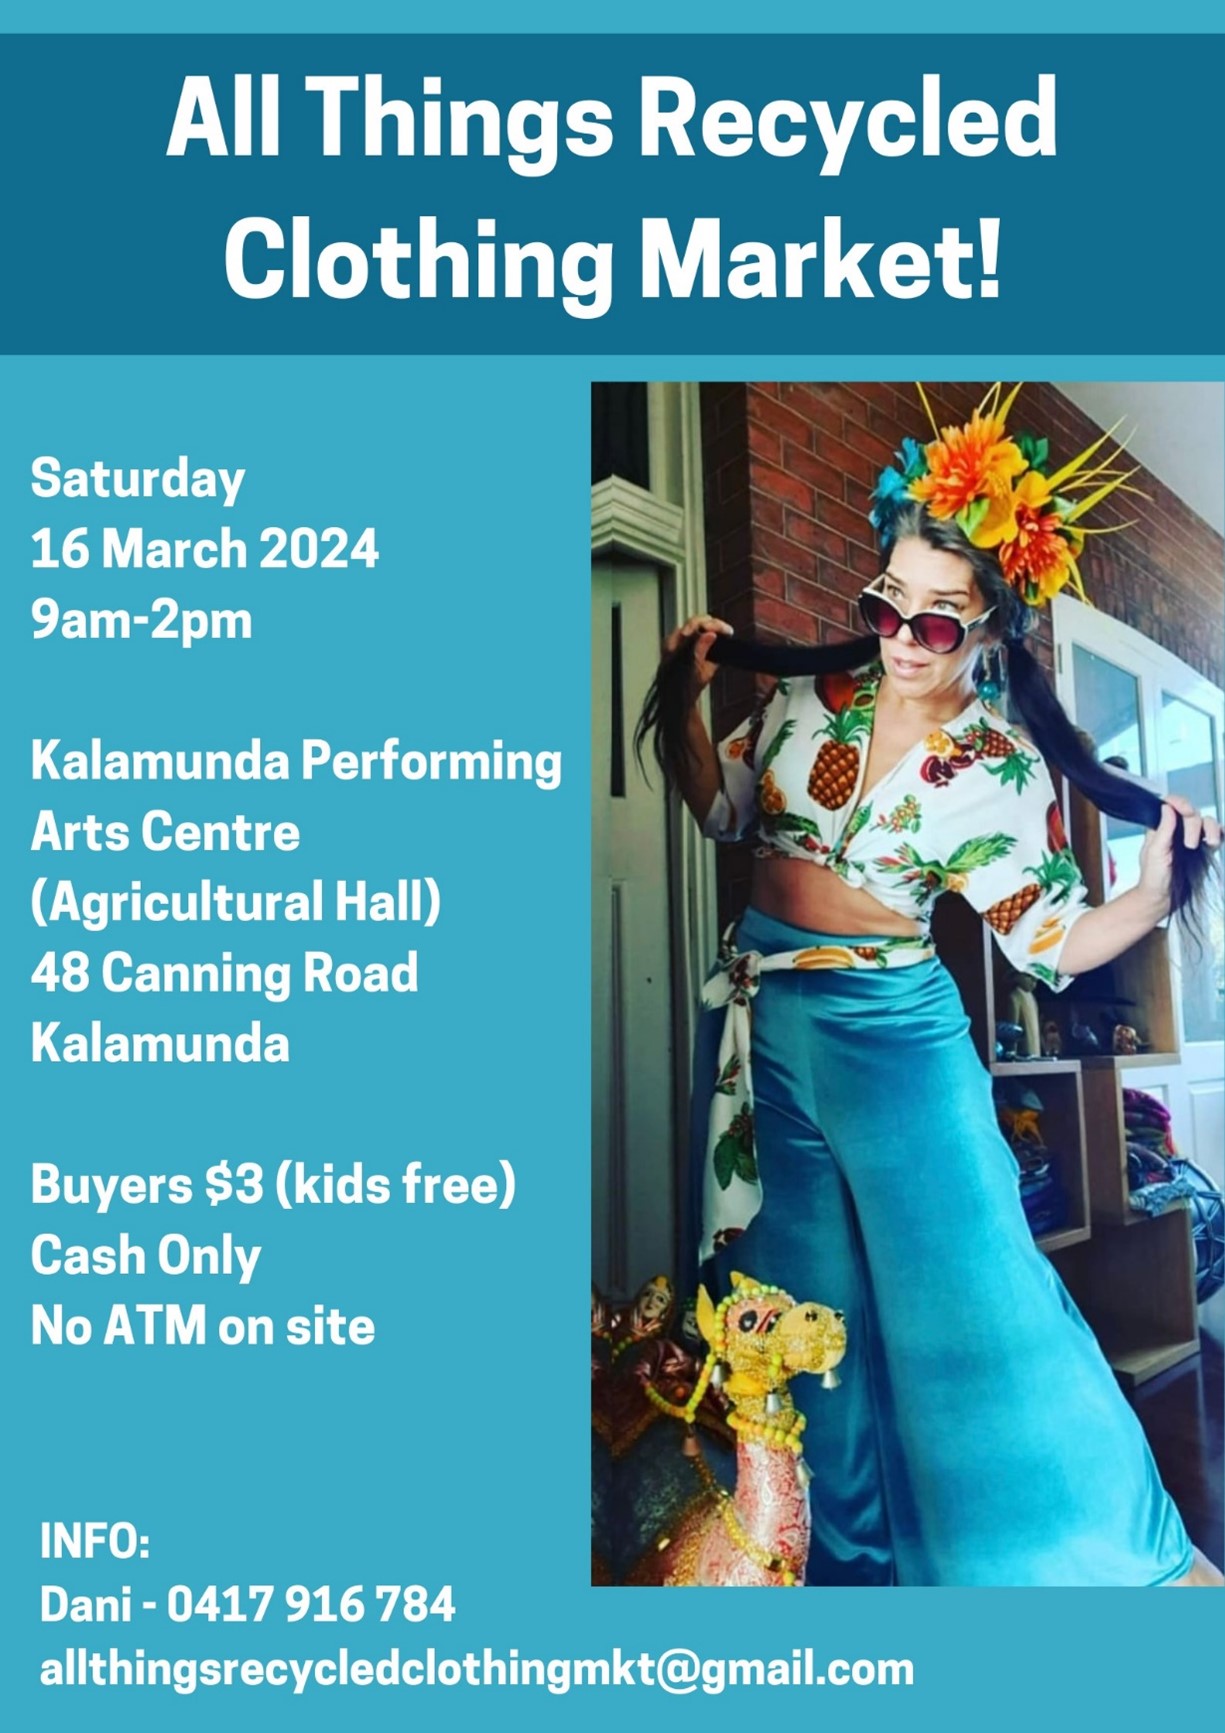 All things recycled clothing market - flyer design